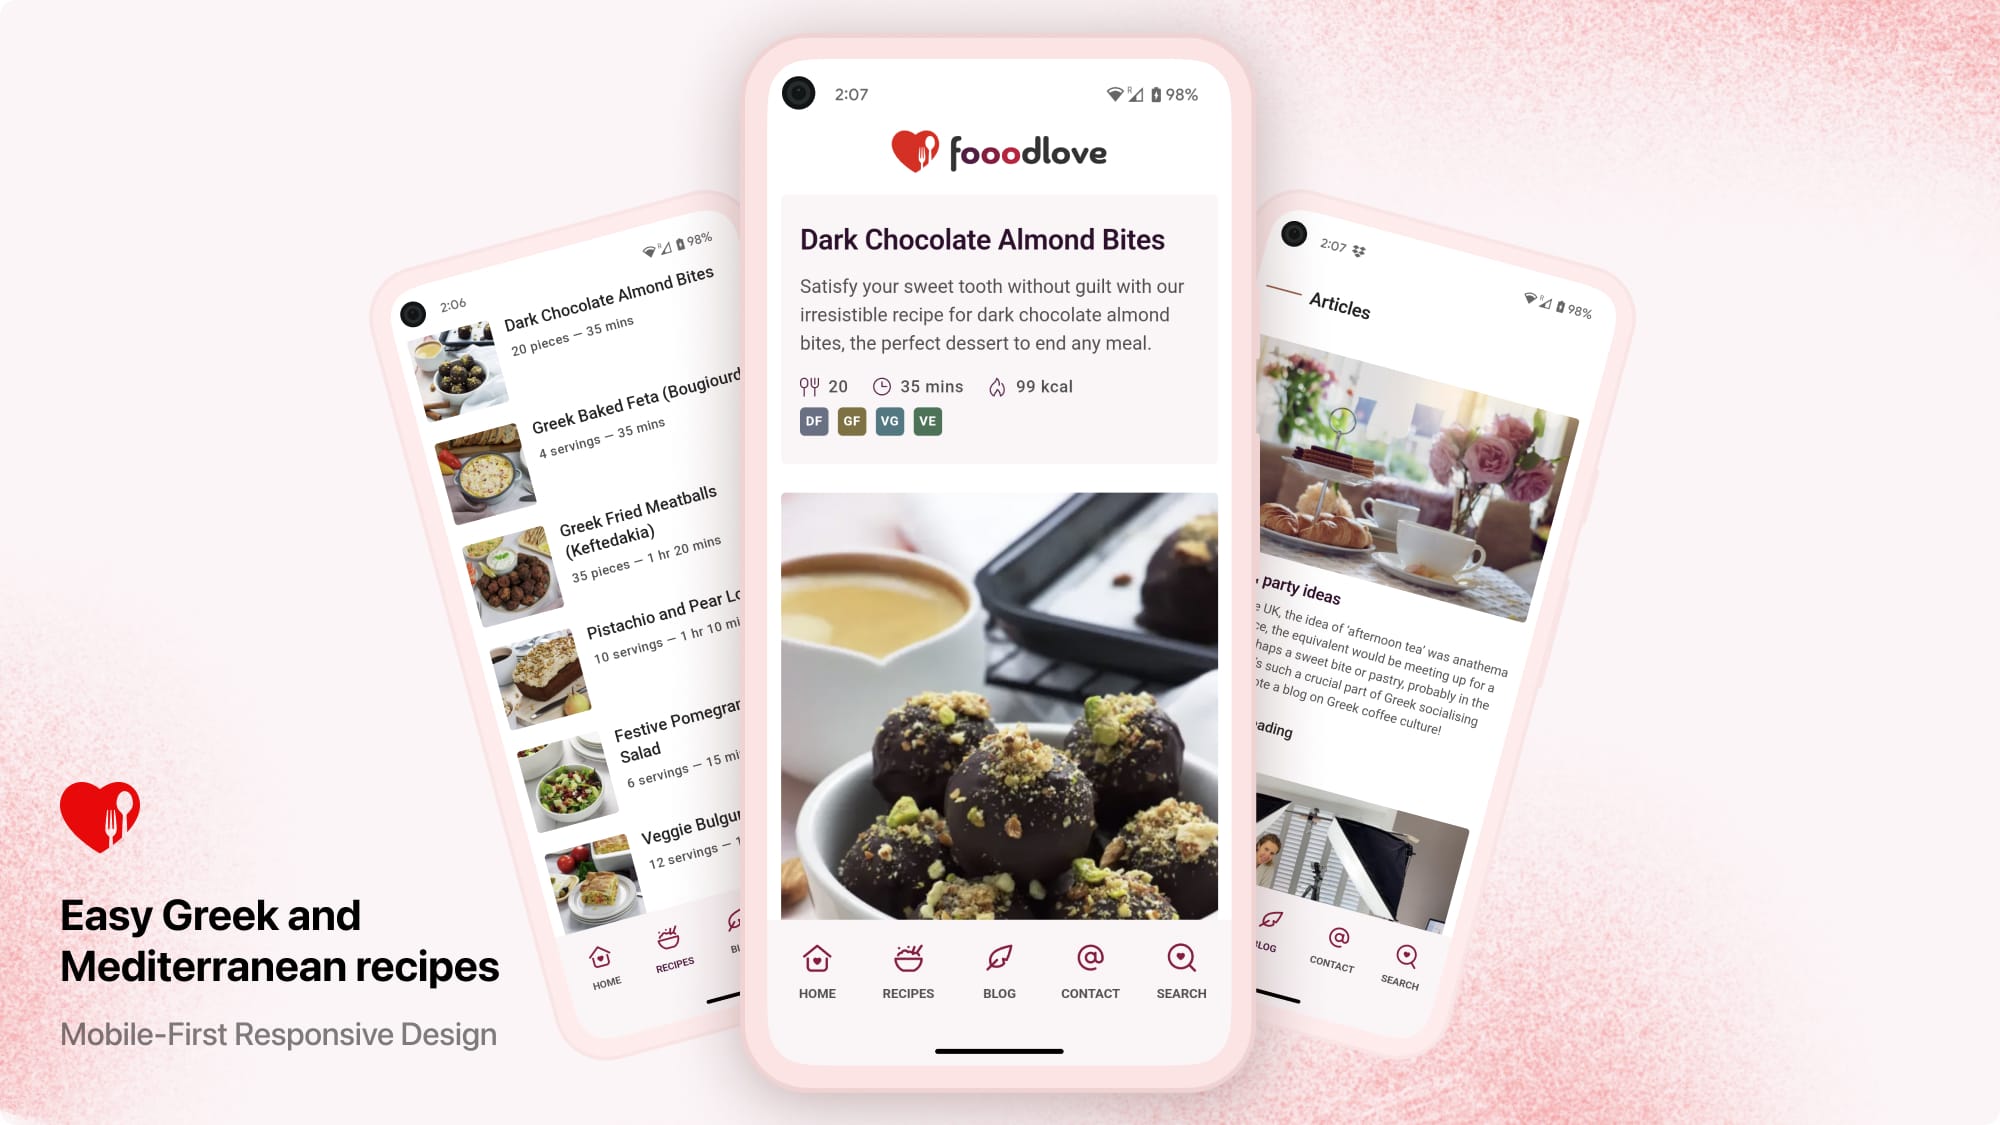 Fooodlove showcased on multiple Android devices